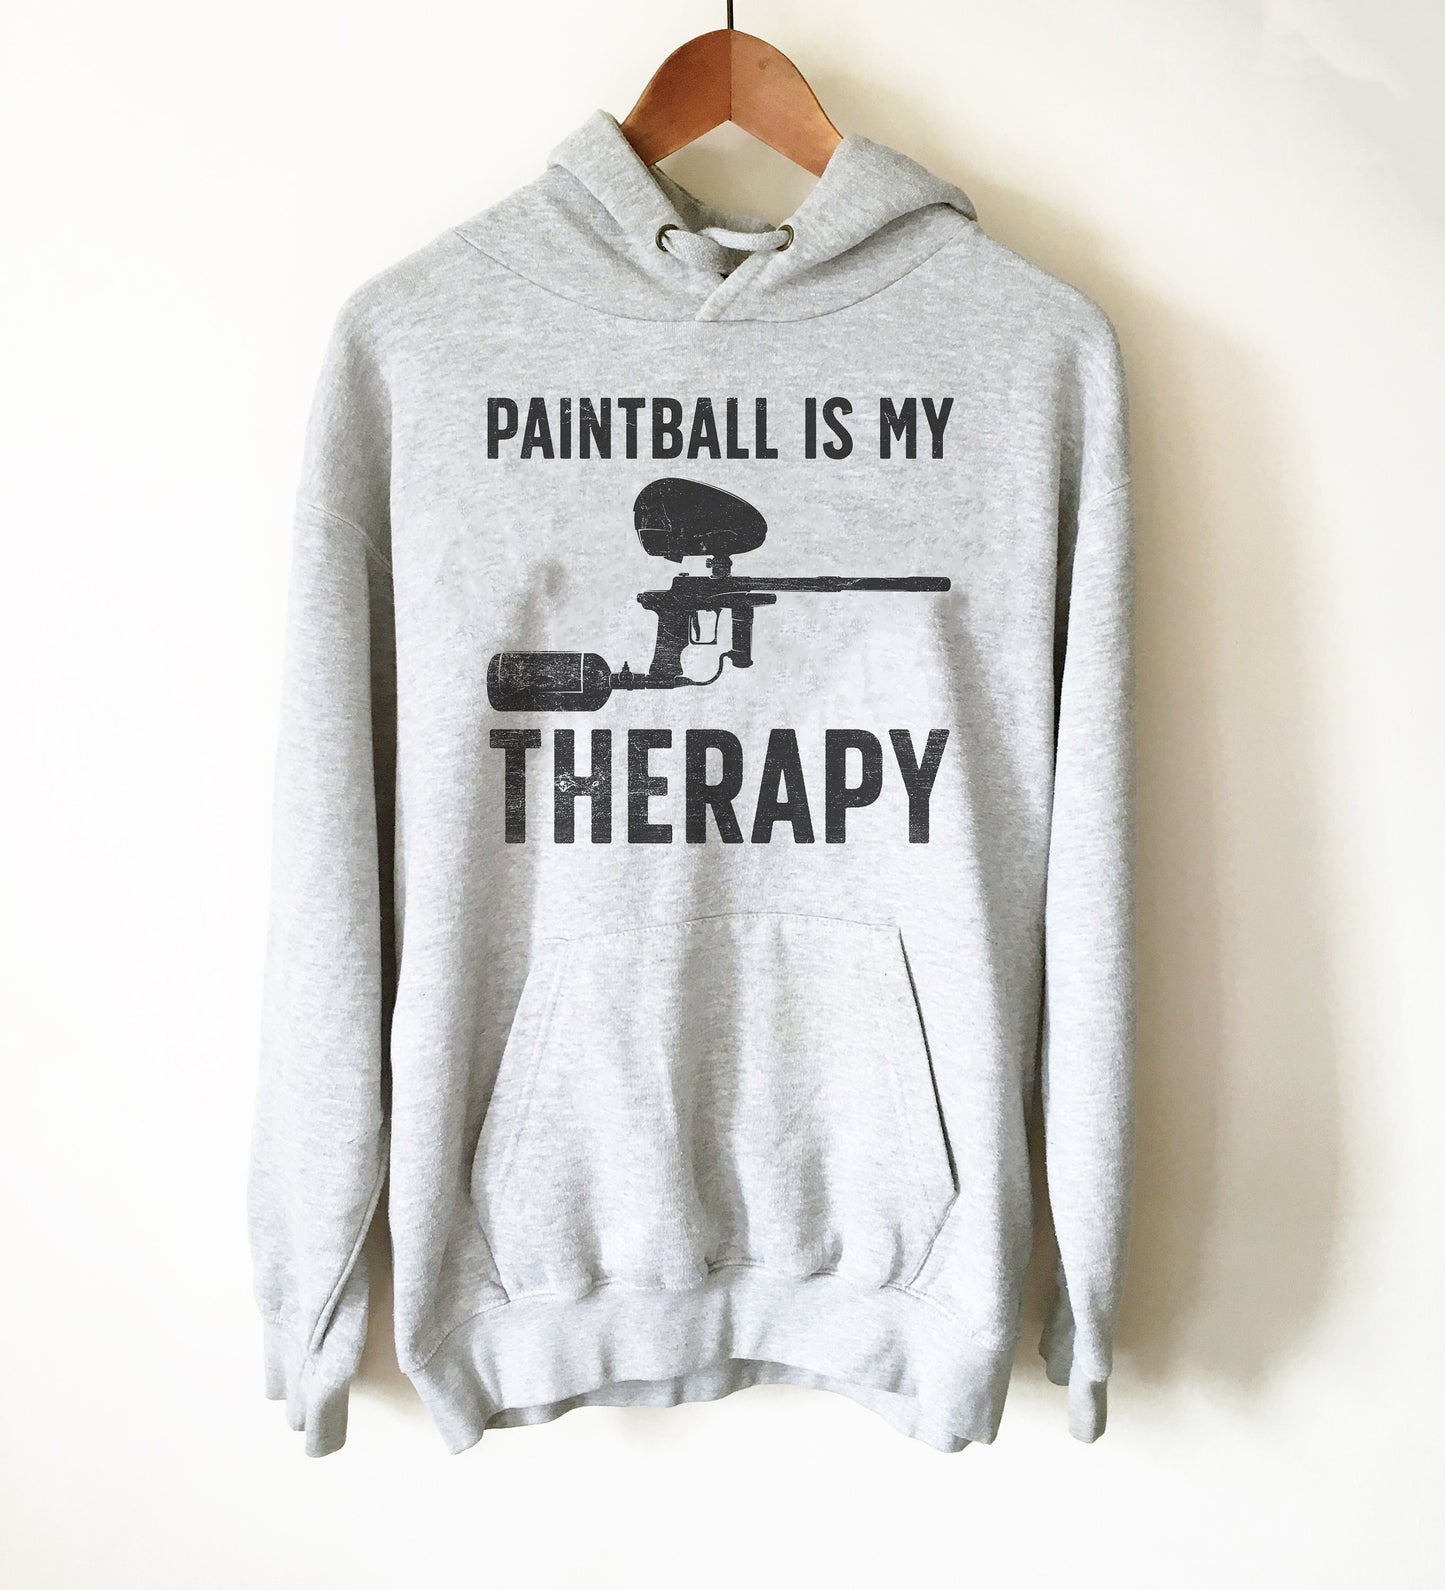 Paintball Is My Therapy Hoodie - Paintball Shirt, Paintball Gift, Bachelor Party Shirt, Bachelorette Party Shirt, Team T-Shirts, Birthday